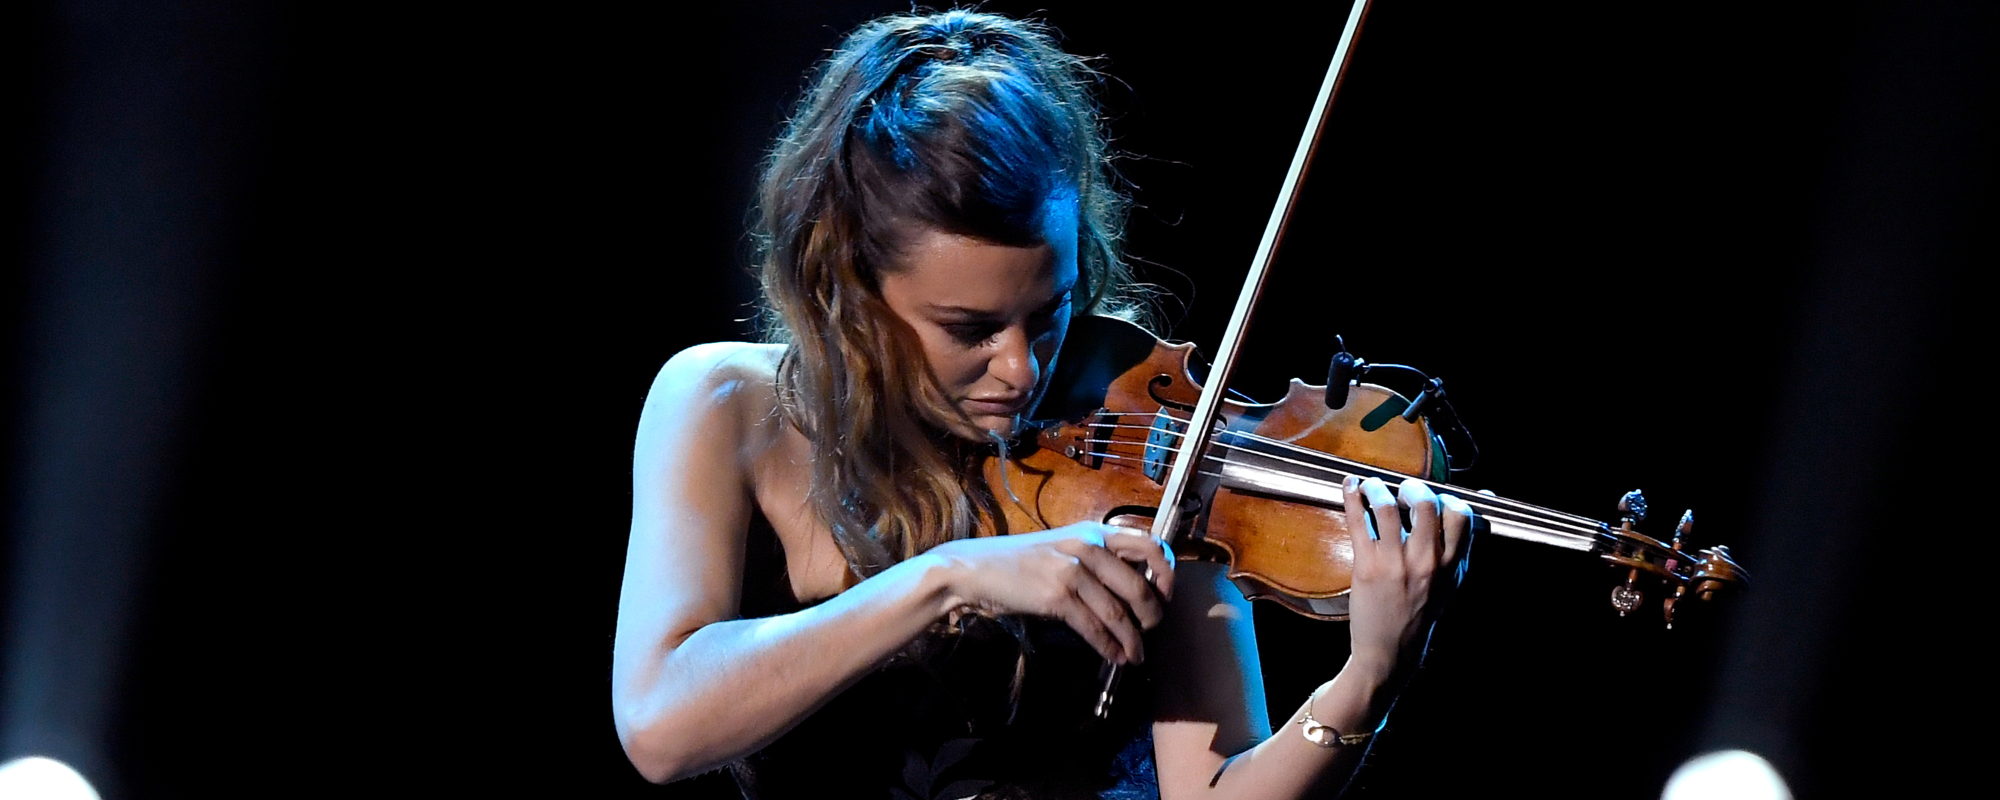 The 5 Greatest Violinists of the 21st Century